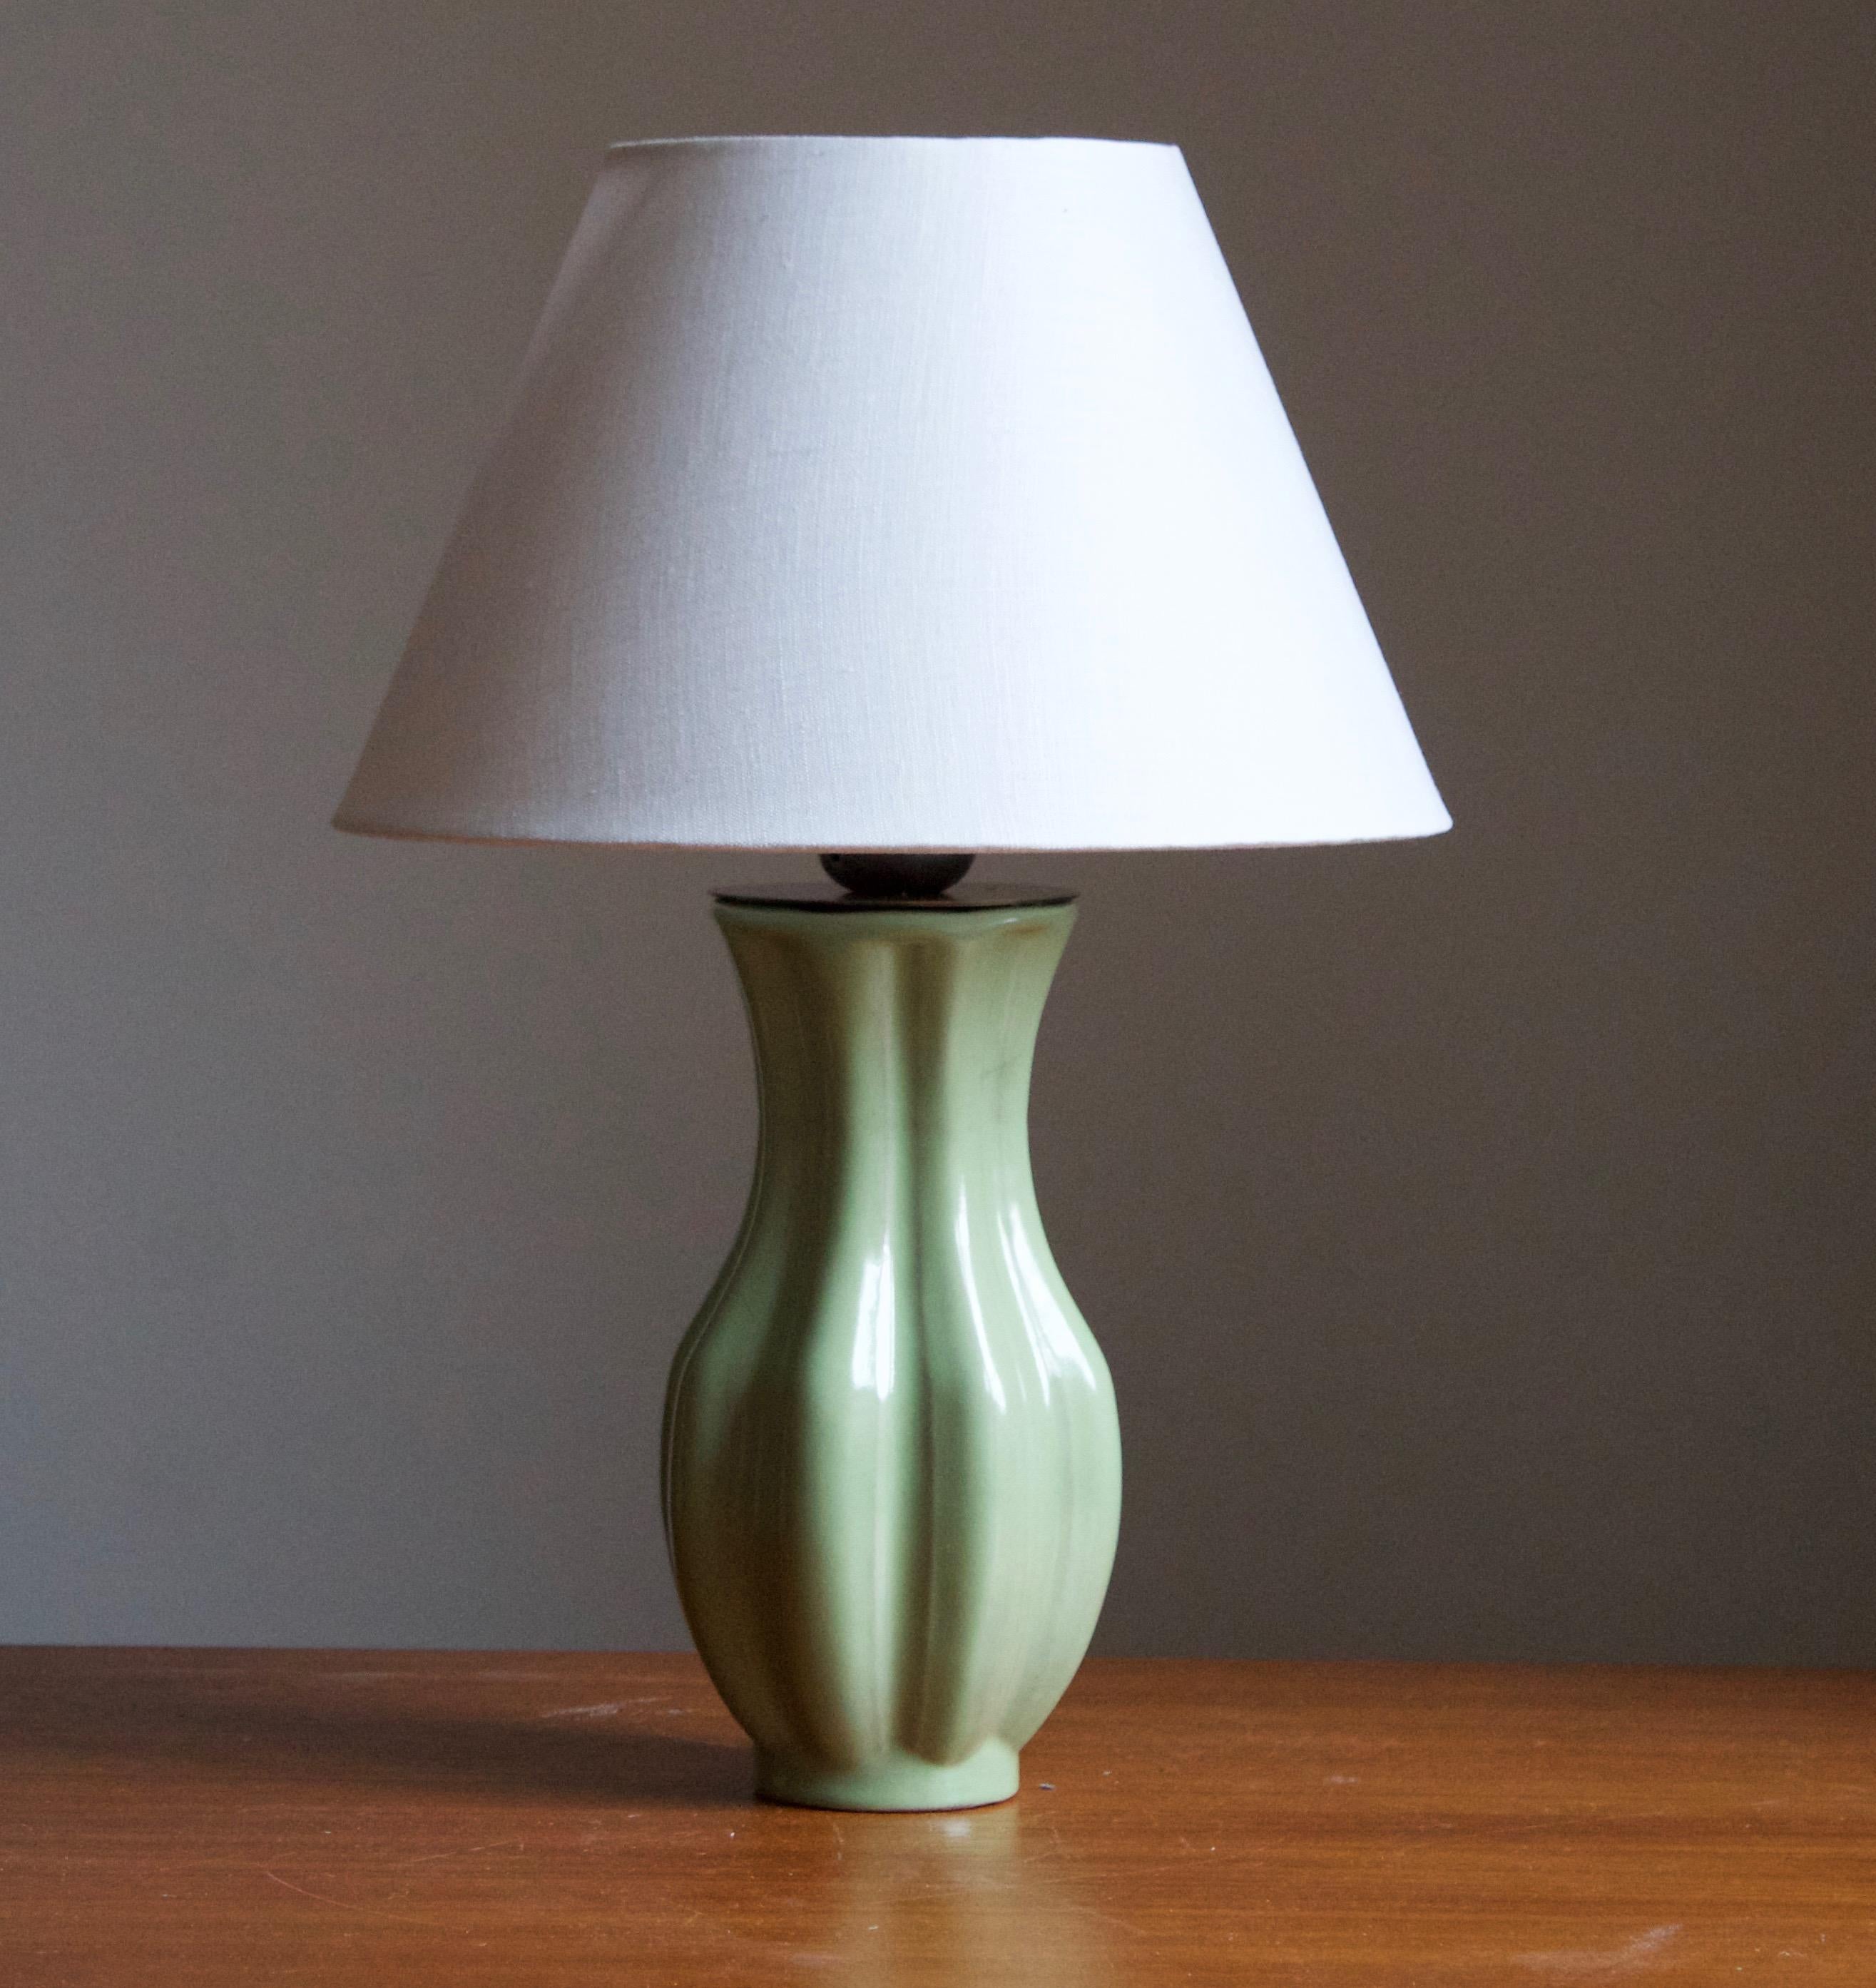 An early modernist table lamp. By Upsala-Ekeby, Sweden, 1930s.

Stated dimensions exclude lampshade. Height includes the socket. Sold without lampshade.

Other designers of the period include Ettore Sottsass, Carl Harry Stålhane, Lisa Larsson,